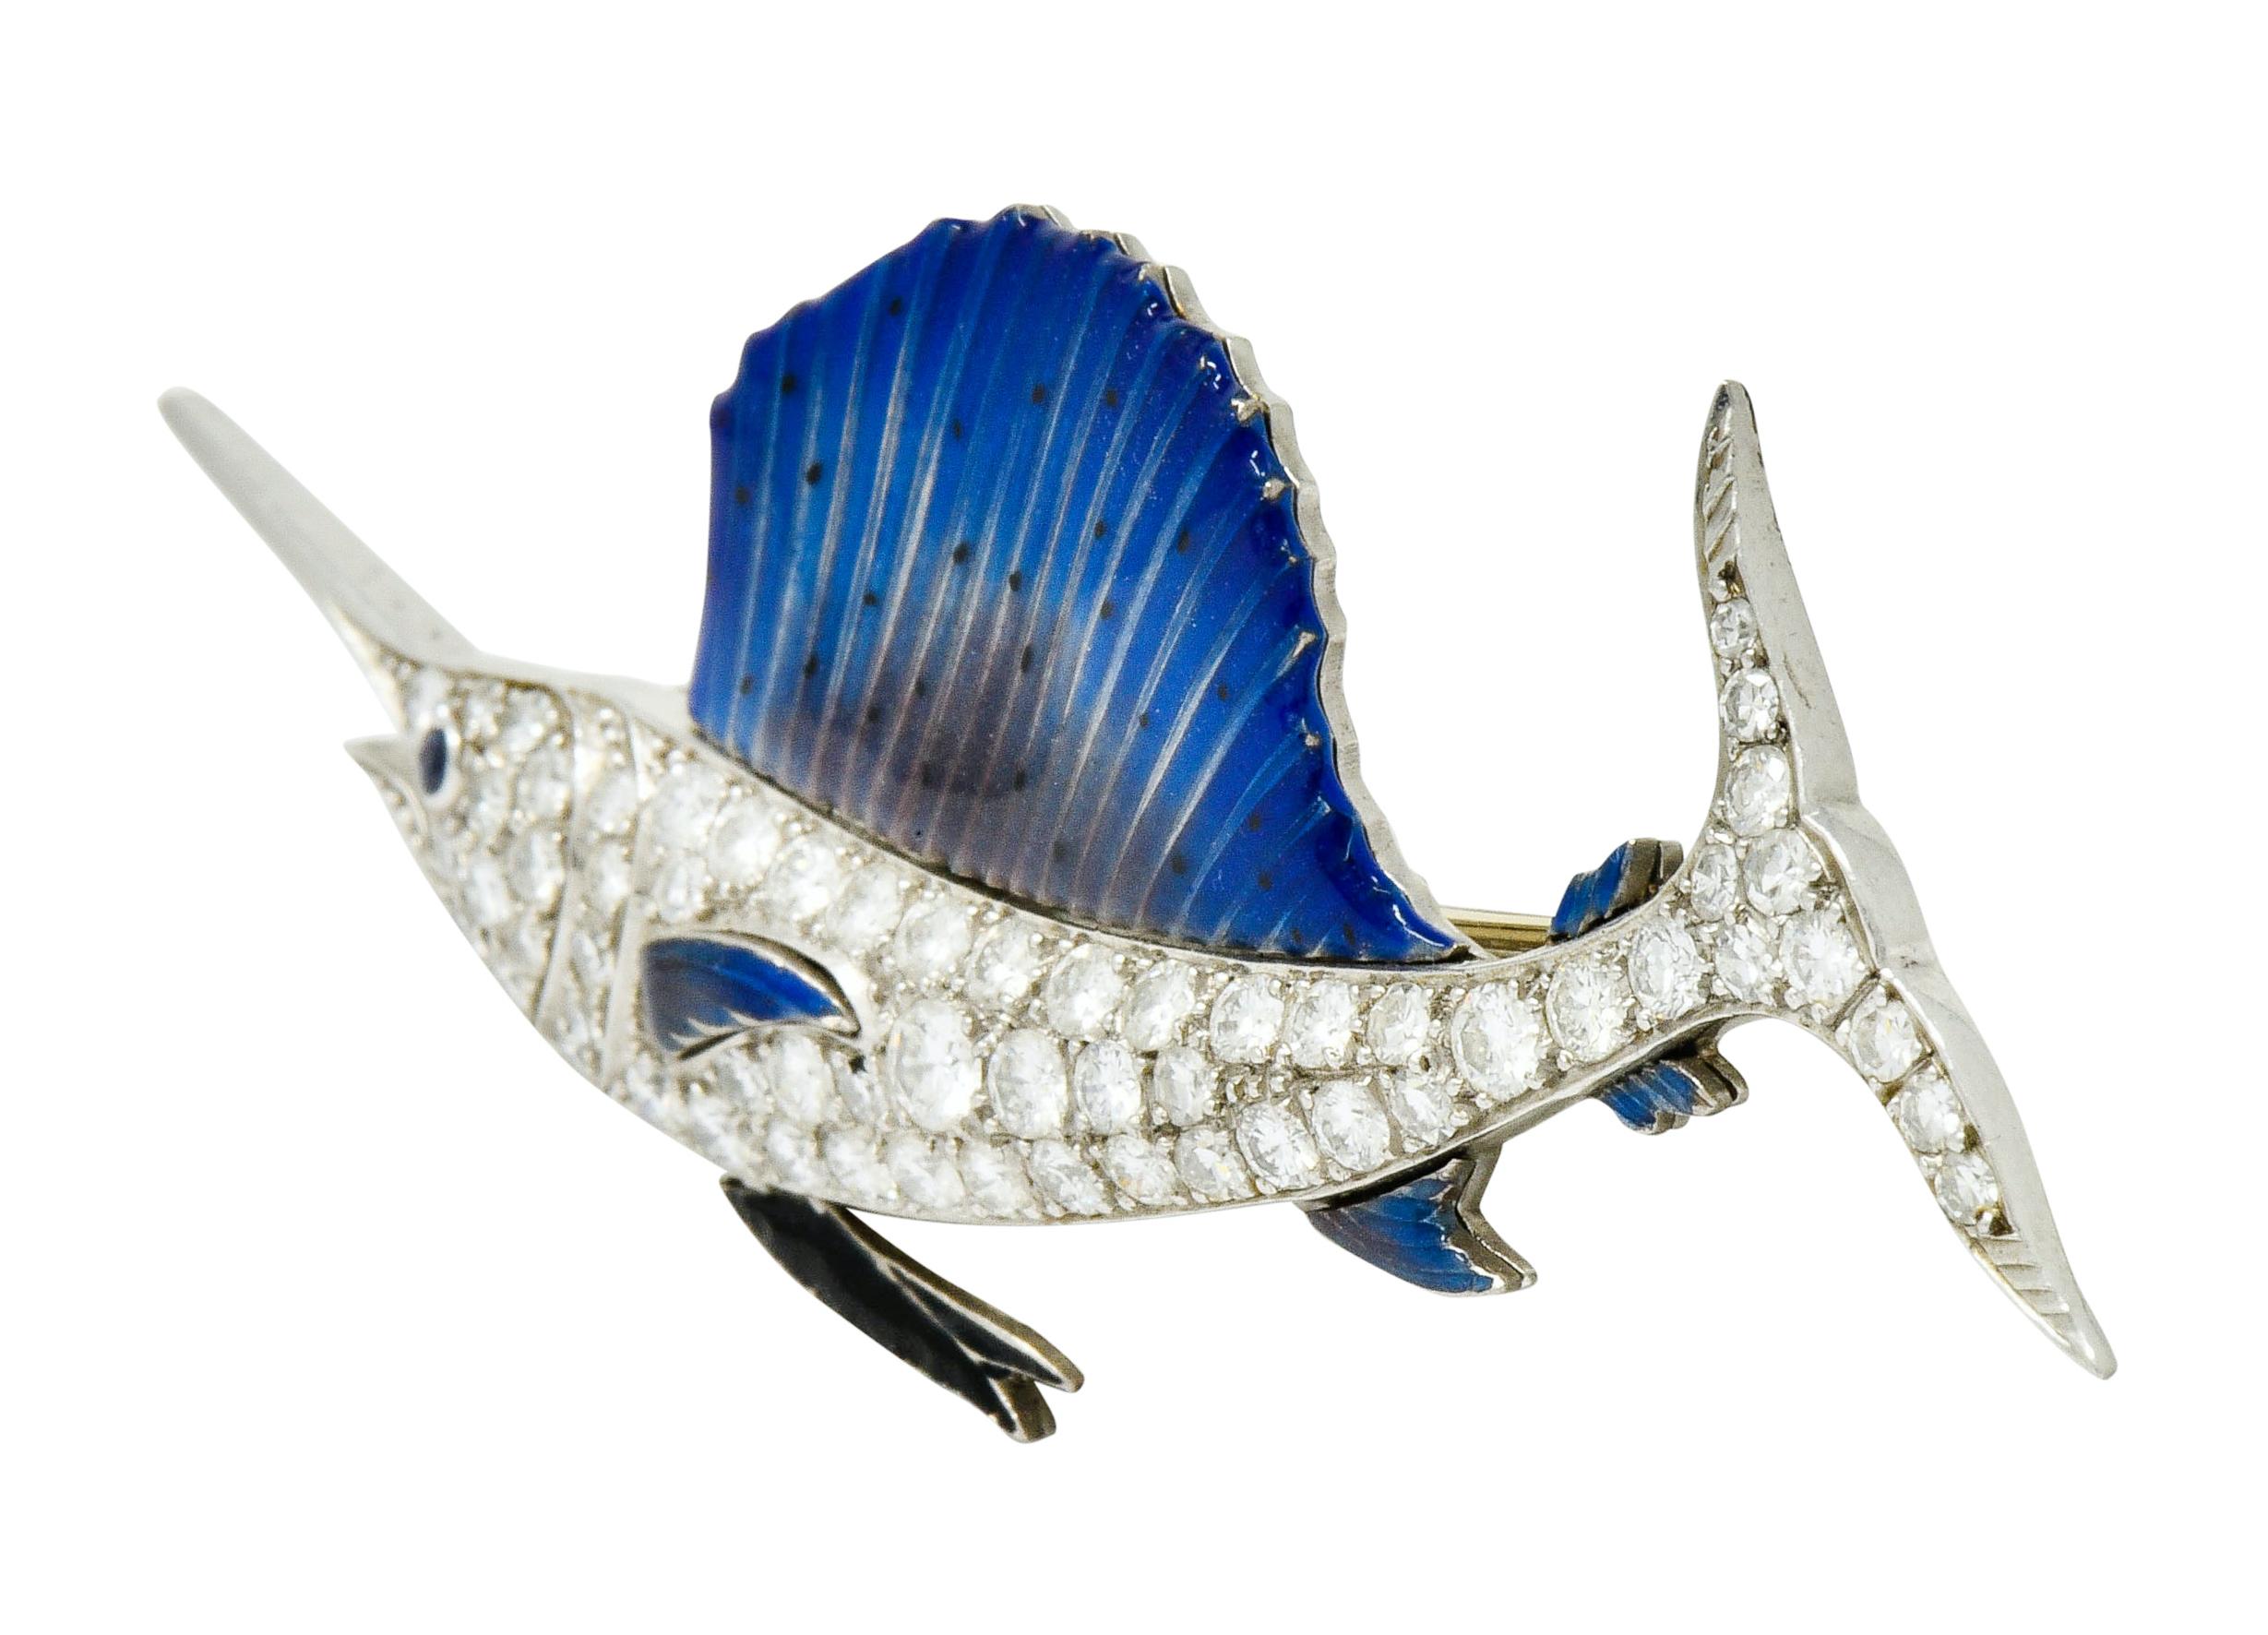 Brooch designed as a swordfish with a bowed body, open mouth, and sapphire eye accent

Set throughout by single cut and round brilliant cut diamonds weighing in total approximately 2.60 carats, G to I color with VS clarity

Quality is consistent